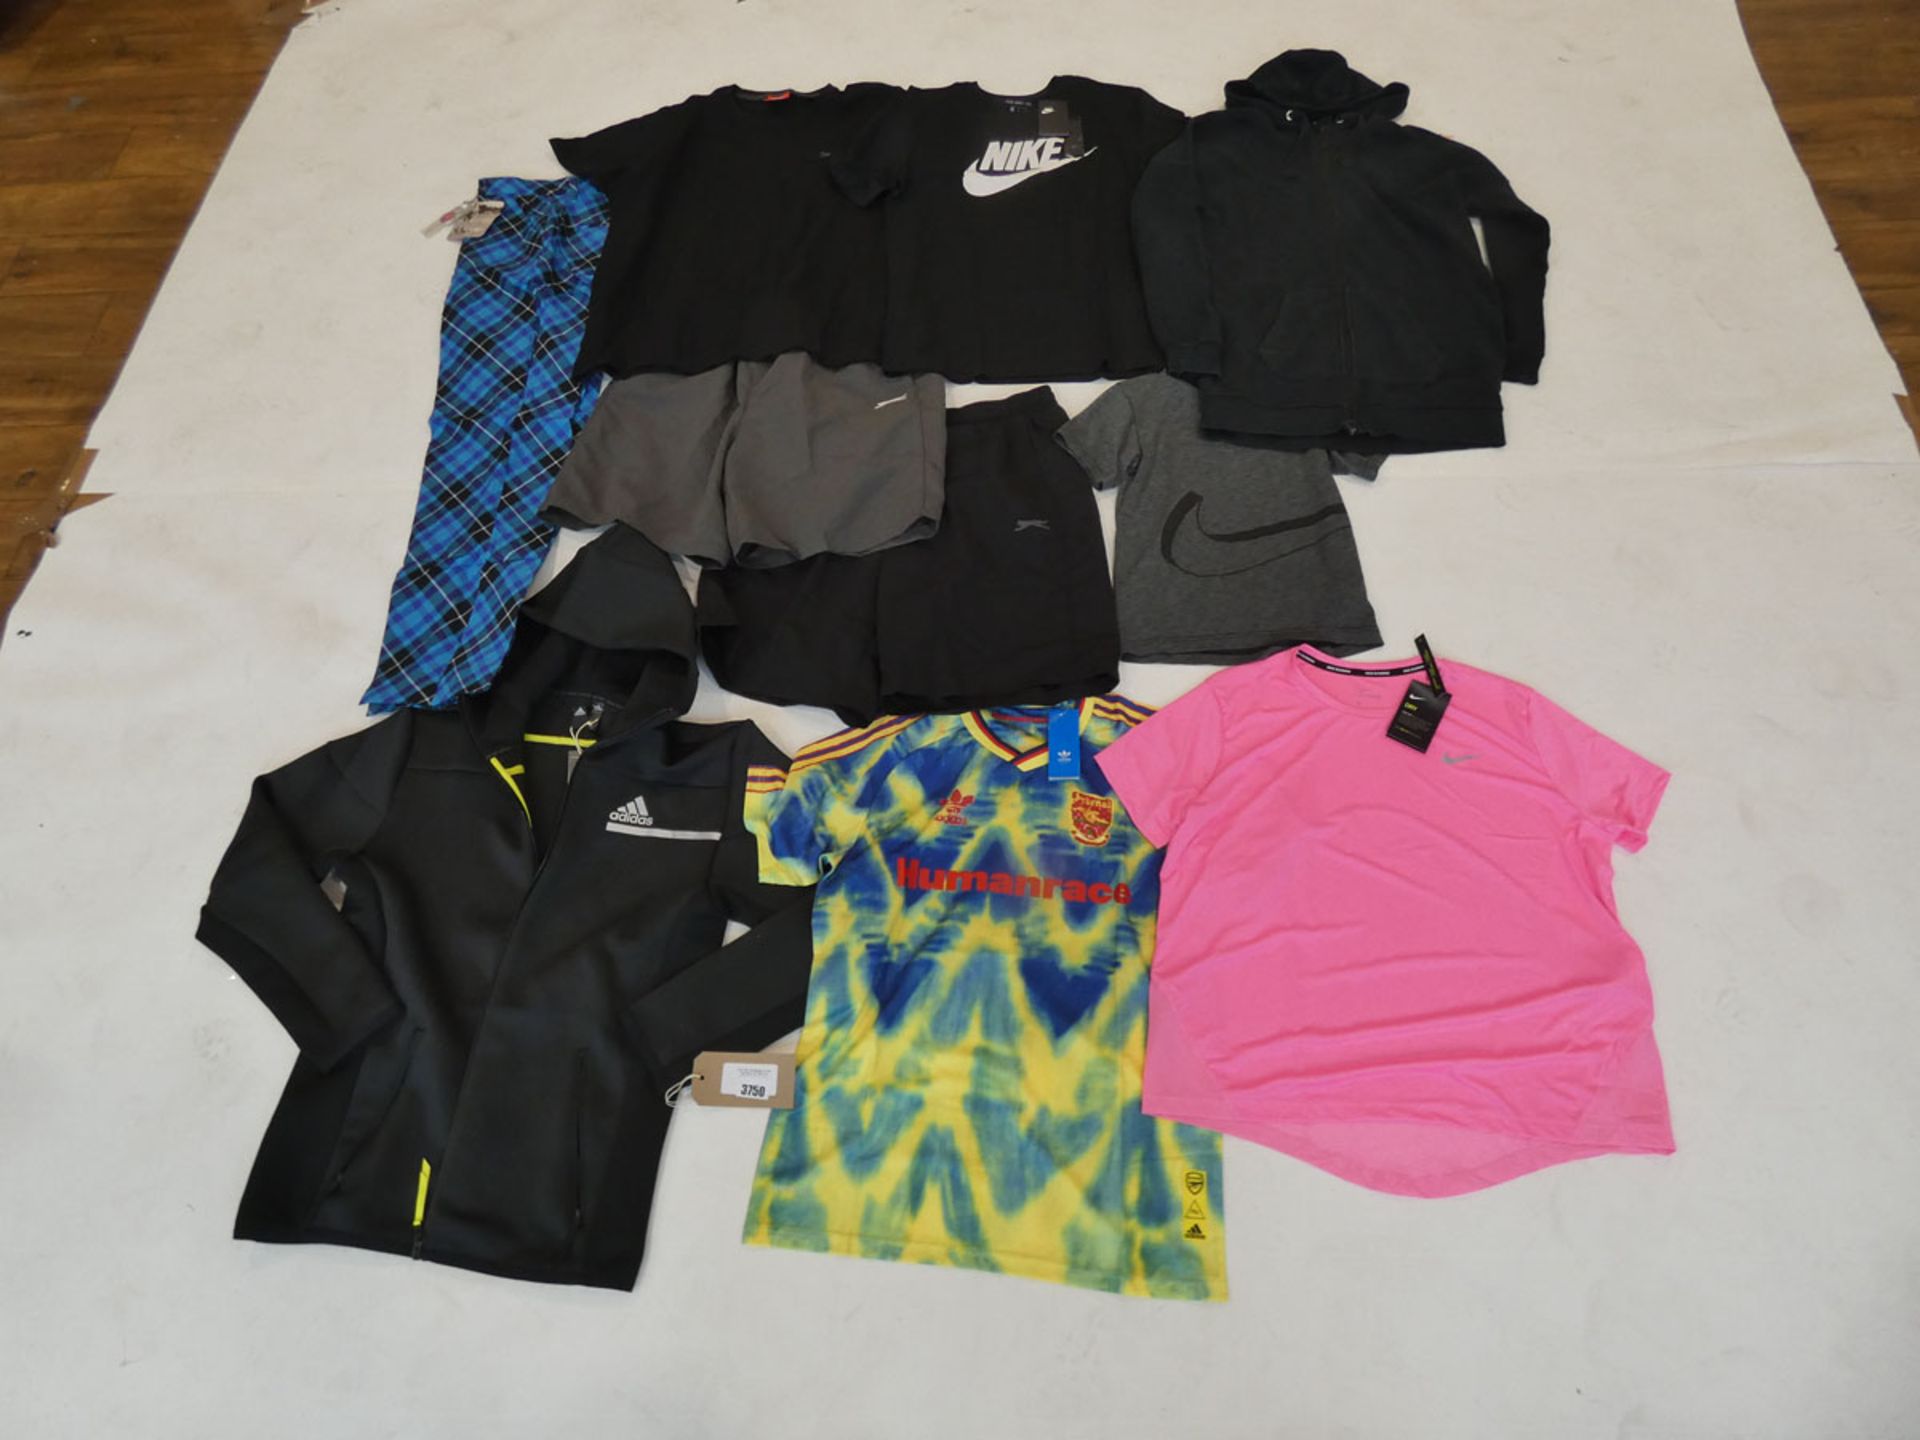 Selection of sportswear to include Nike, Adidas, Puma, etc - in various sizes